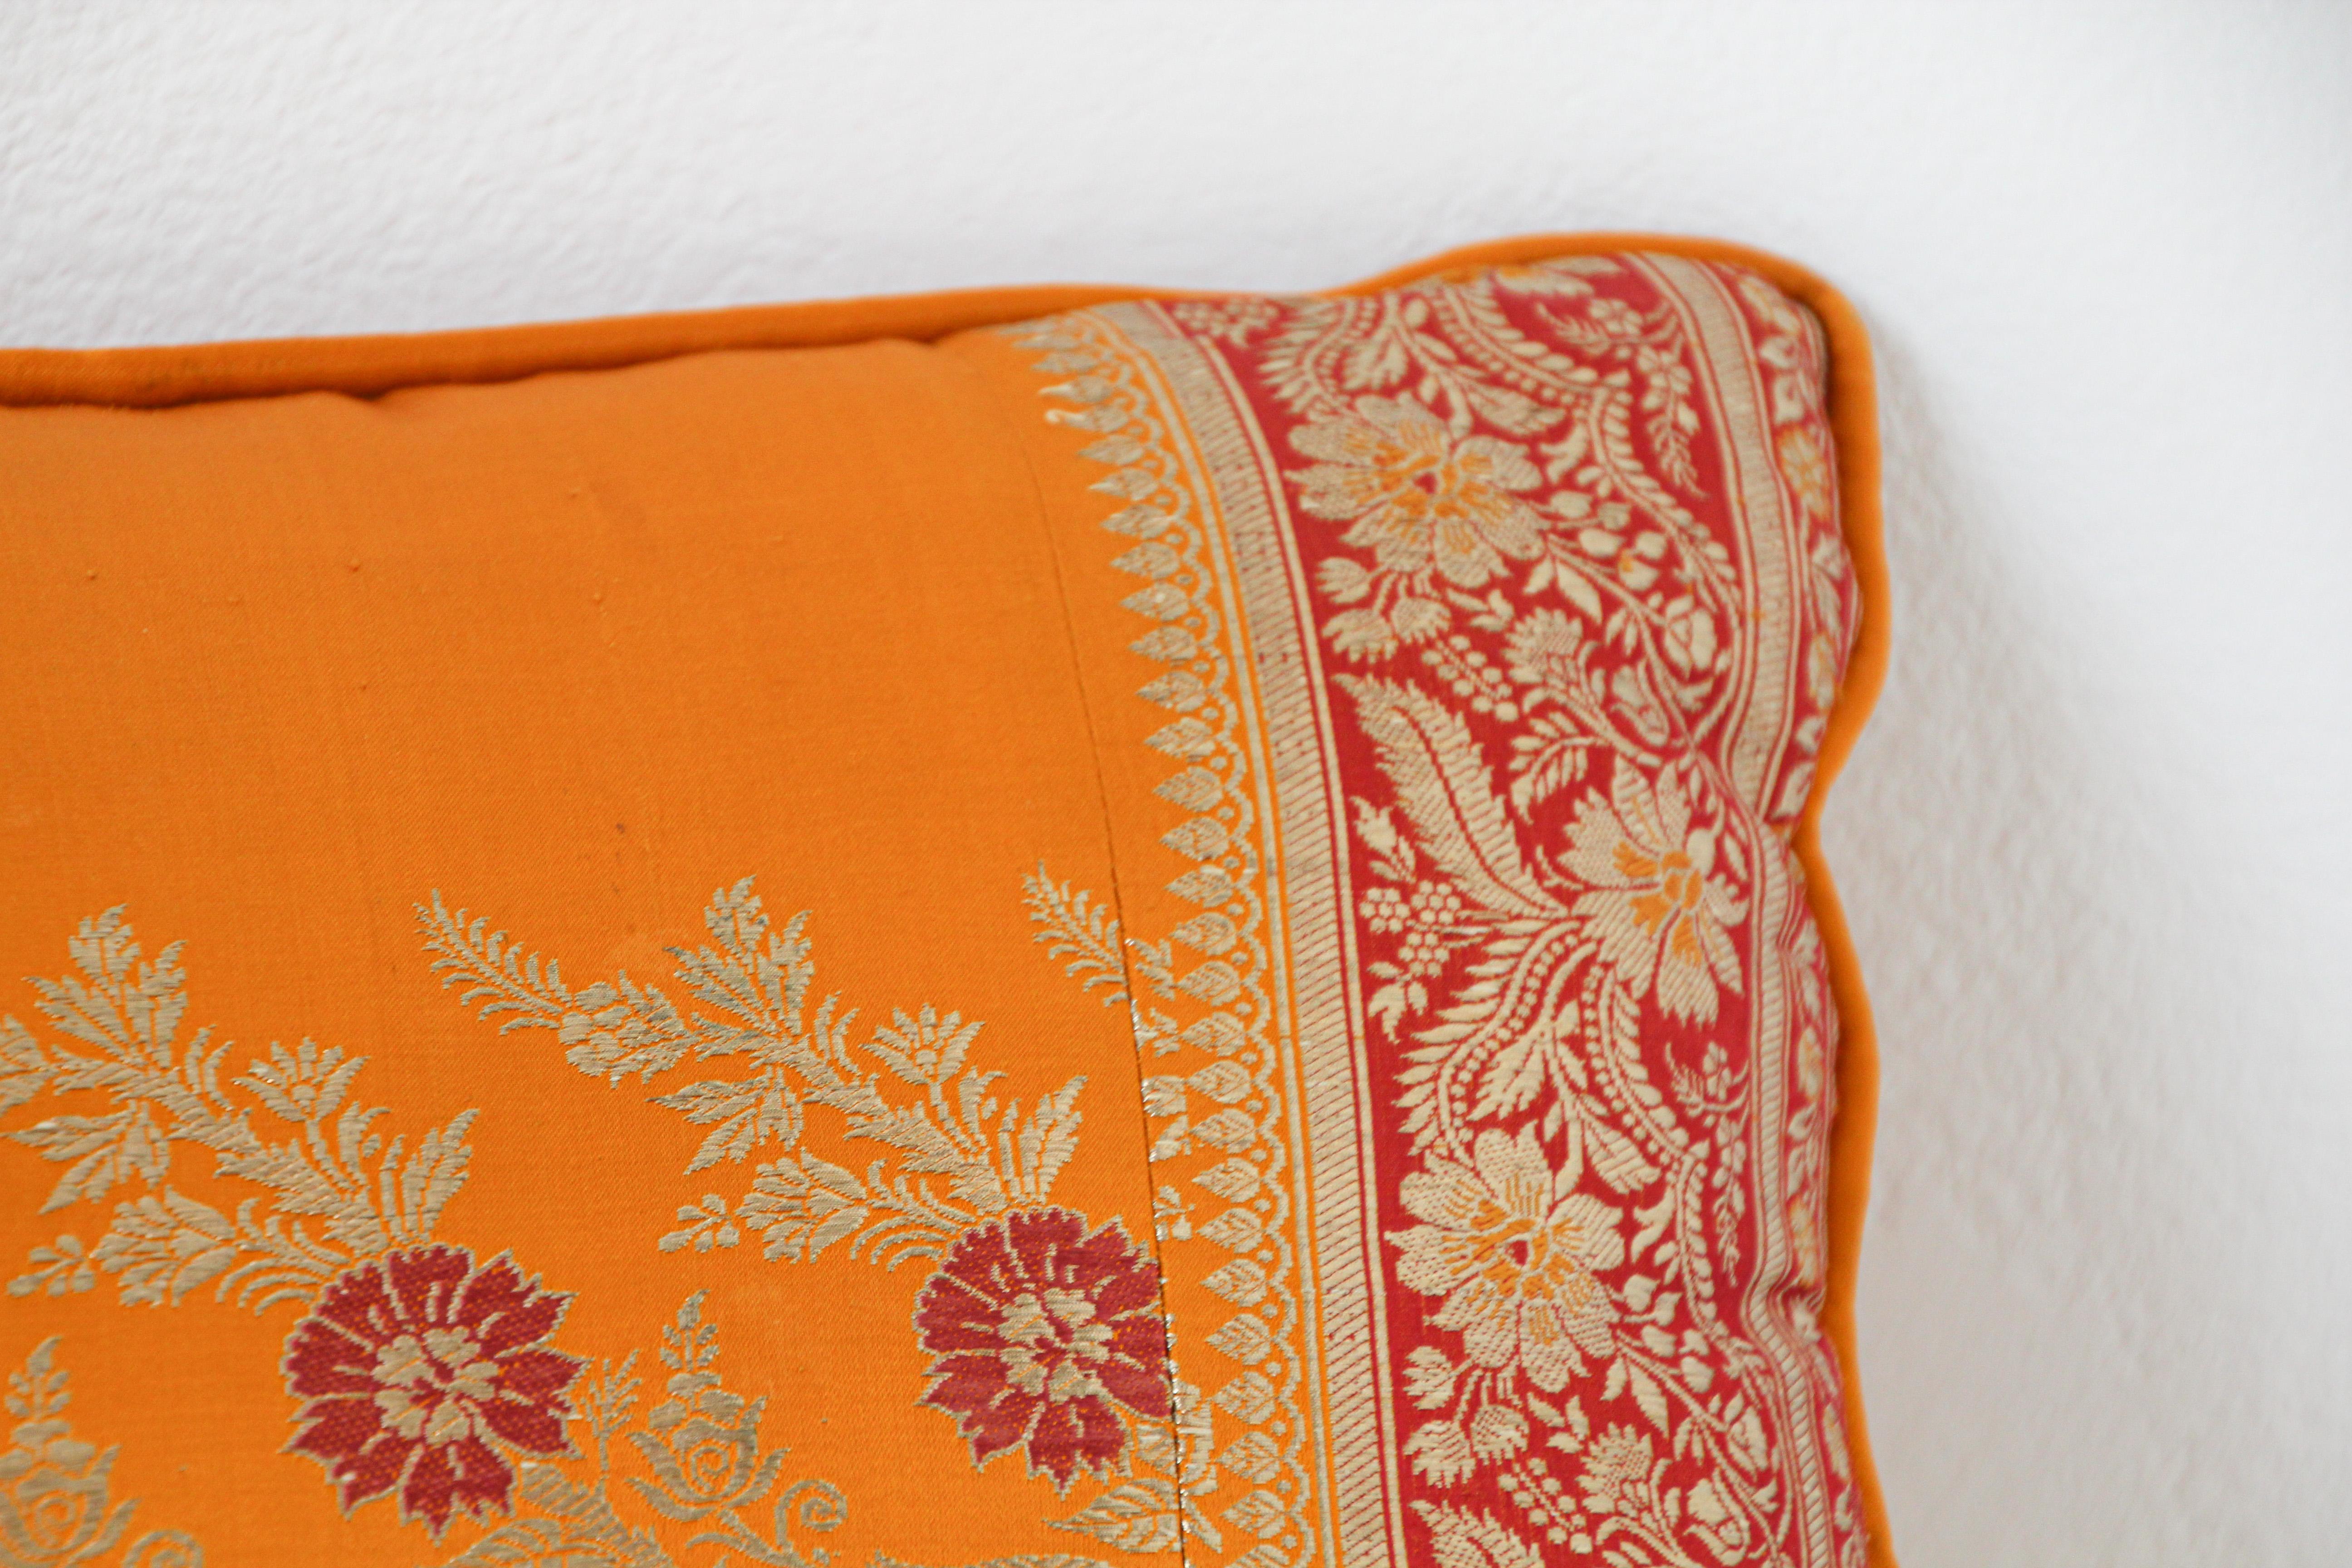 Silk Pillow Custom Made from a Wedding Orange Sari, India In Good Condition For Sale In North Hollywood, CA